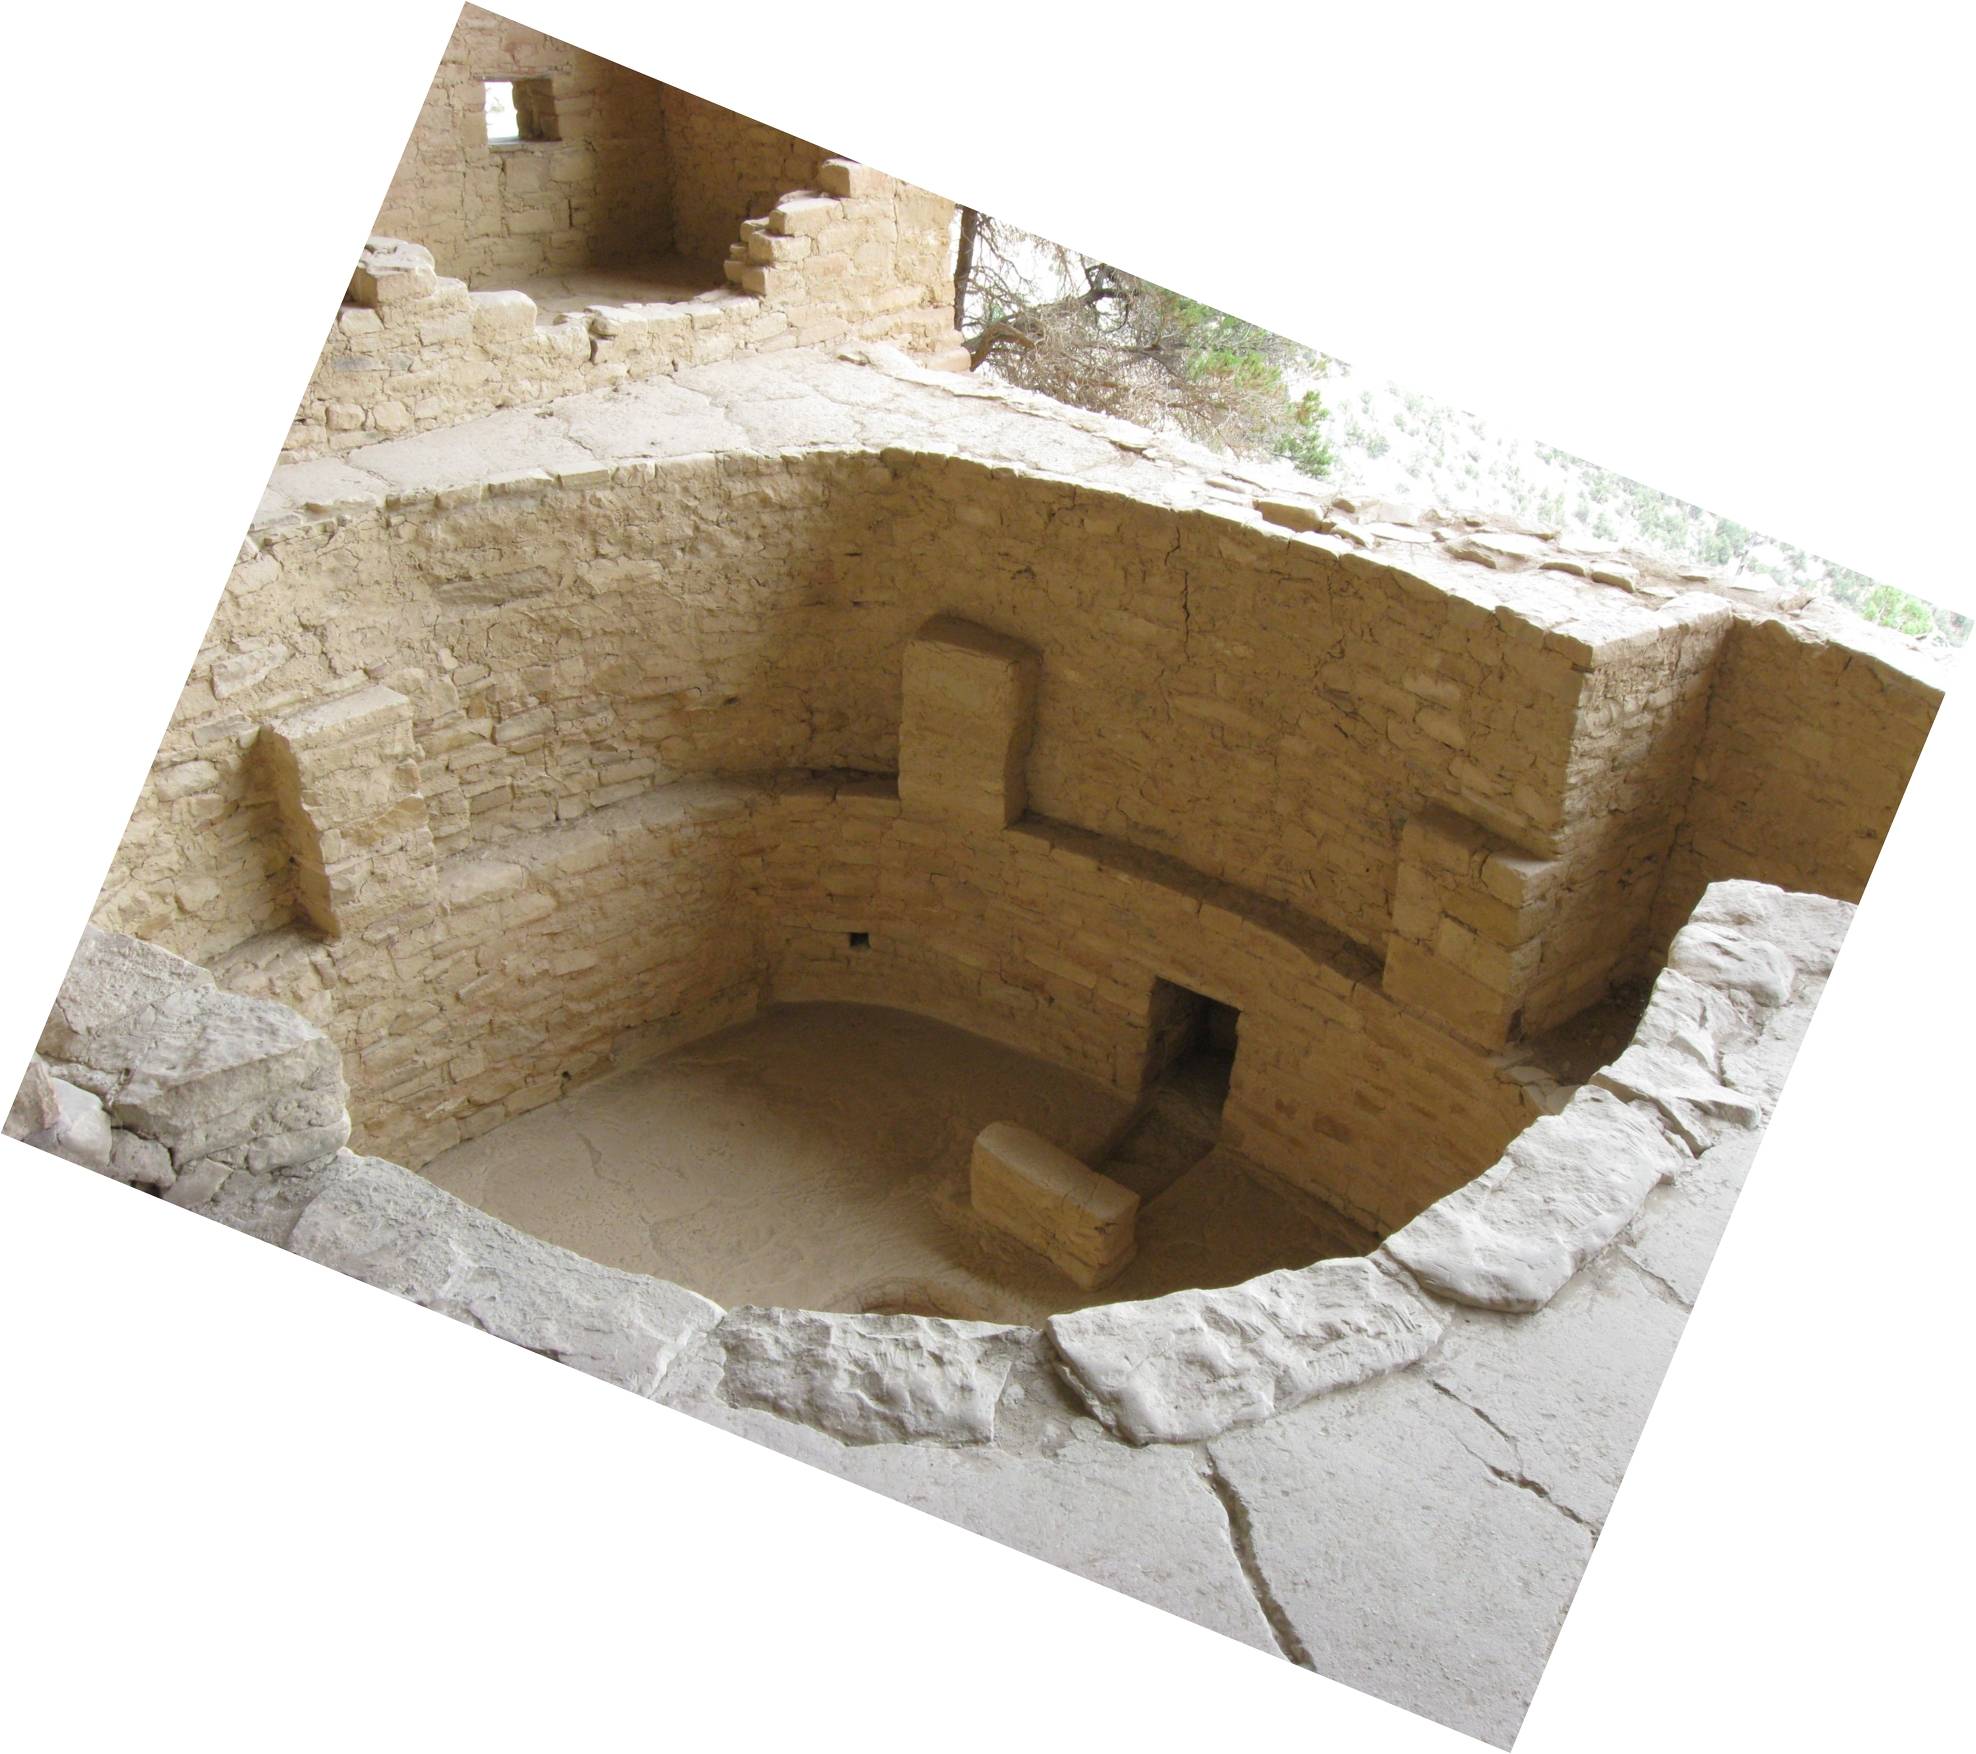 Image: A kiva -- a round underground building used presumably for combined religious, social, and utilitarian purposes -- in the southern part of the Balcony House cliff dwelling complex